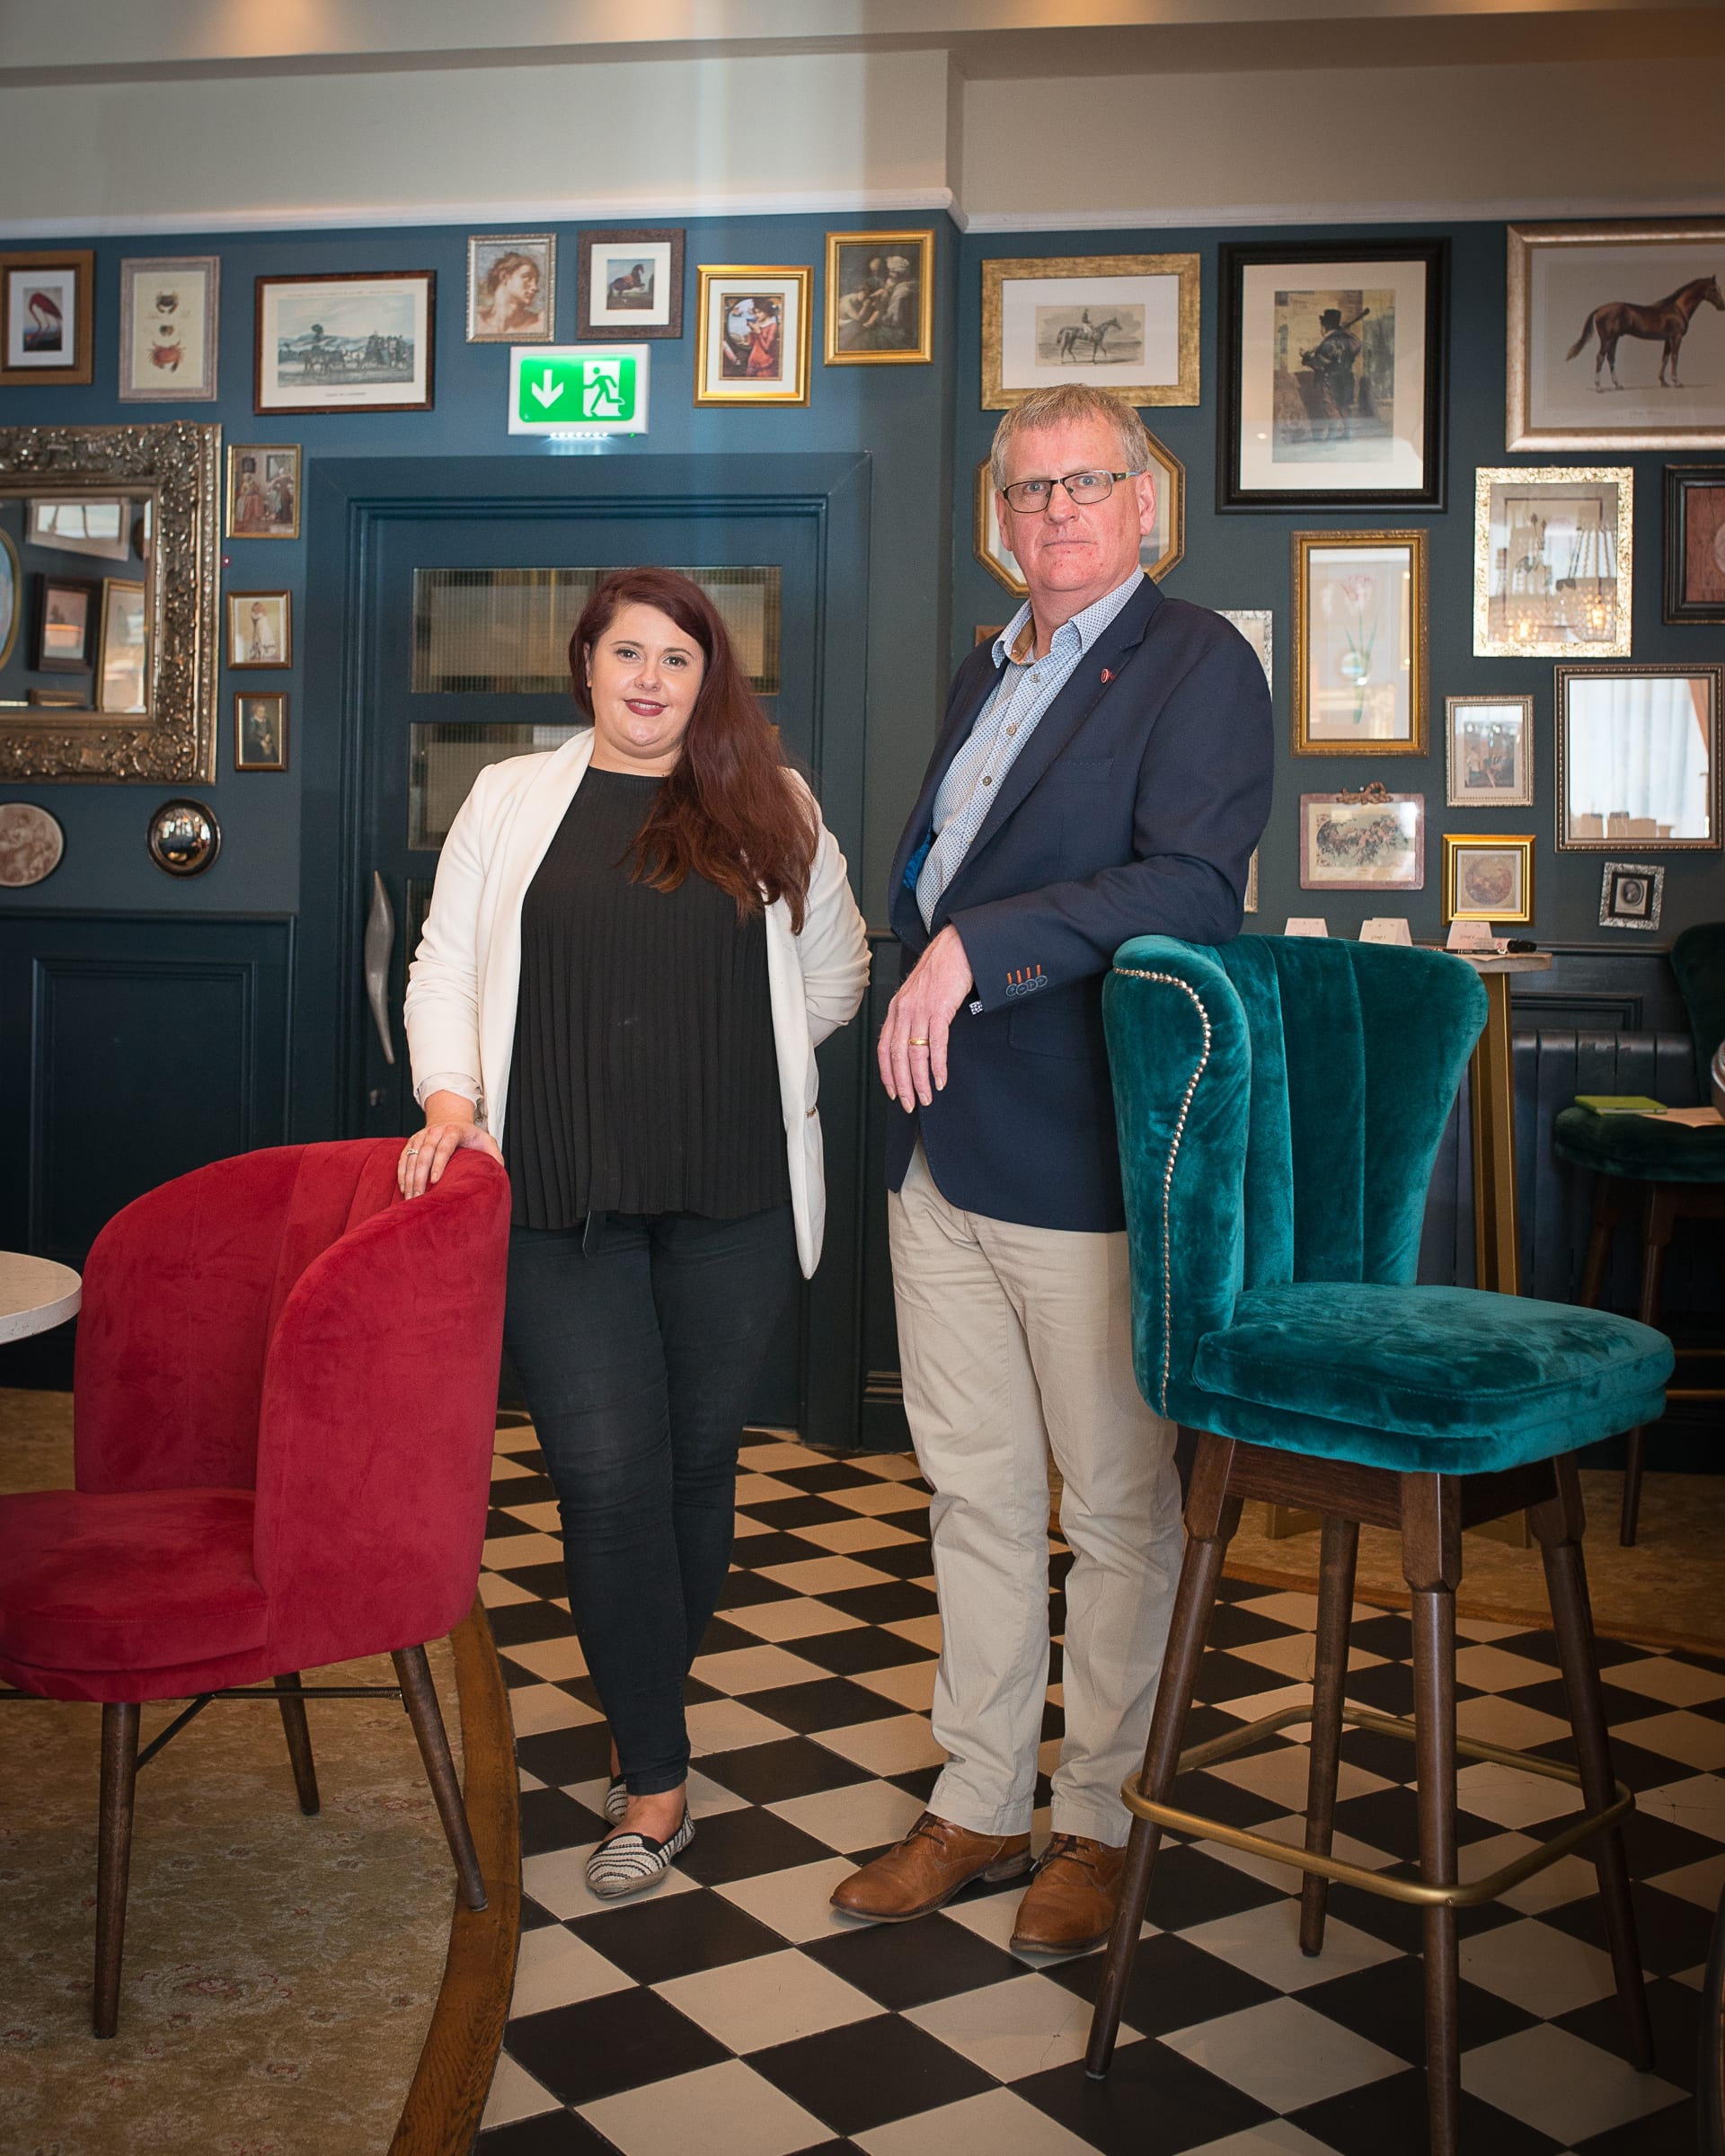 No repro fee: Networking with a Difference held in 101 O’Connell Street. Facilitated by Stephen Pitcher.  23-05-2019, From Left to Right: Caoimhe Moloney - Limerick Chamber, Stephen Pitcher - Facilitator / Stephen Pitcher.ie. 
Photo credit Shauna Kennedy